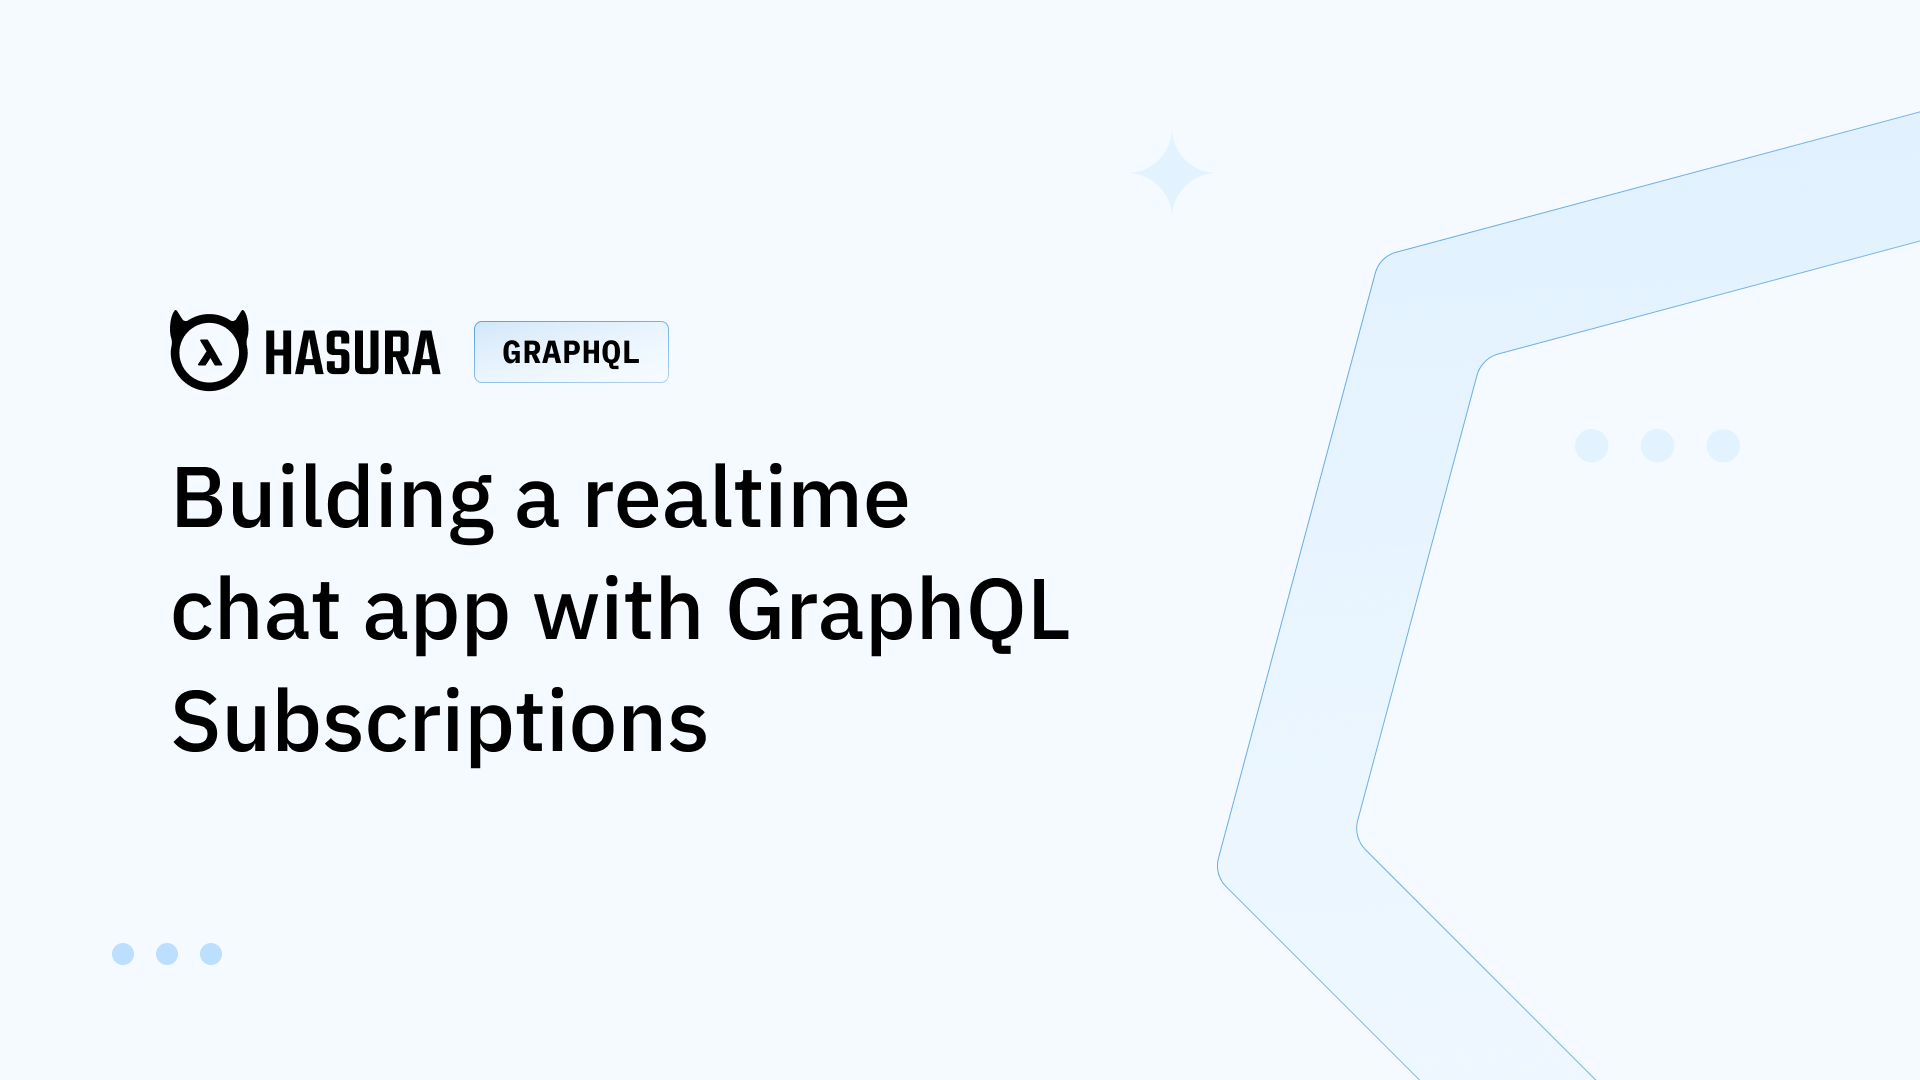 Building a realtime chat app with GraphQL Subscriptions